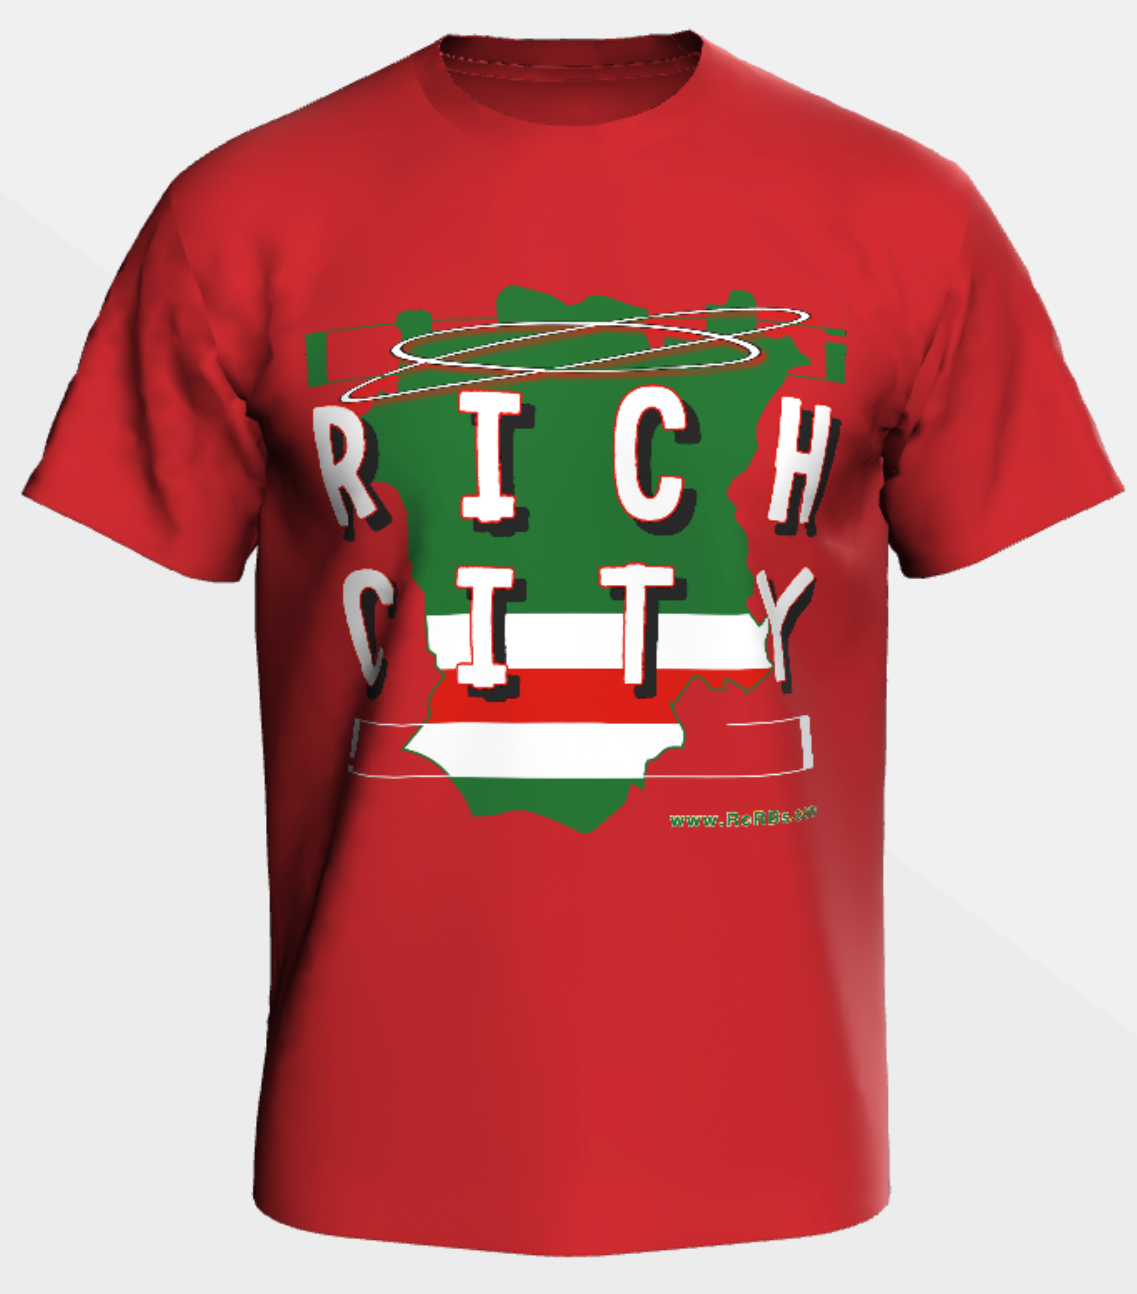 "Evry1's Brand" RichCity Rides Bike/Skate Cooperative -"Chechen Republic"- Sustainable Clothing Collection